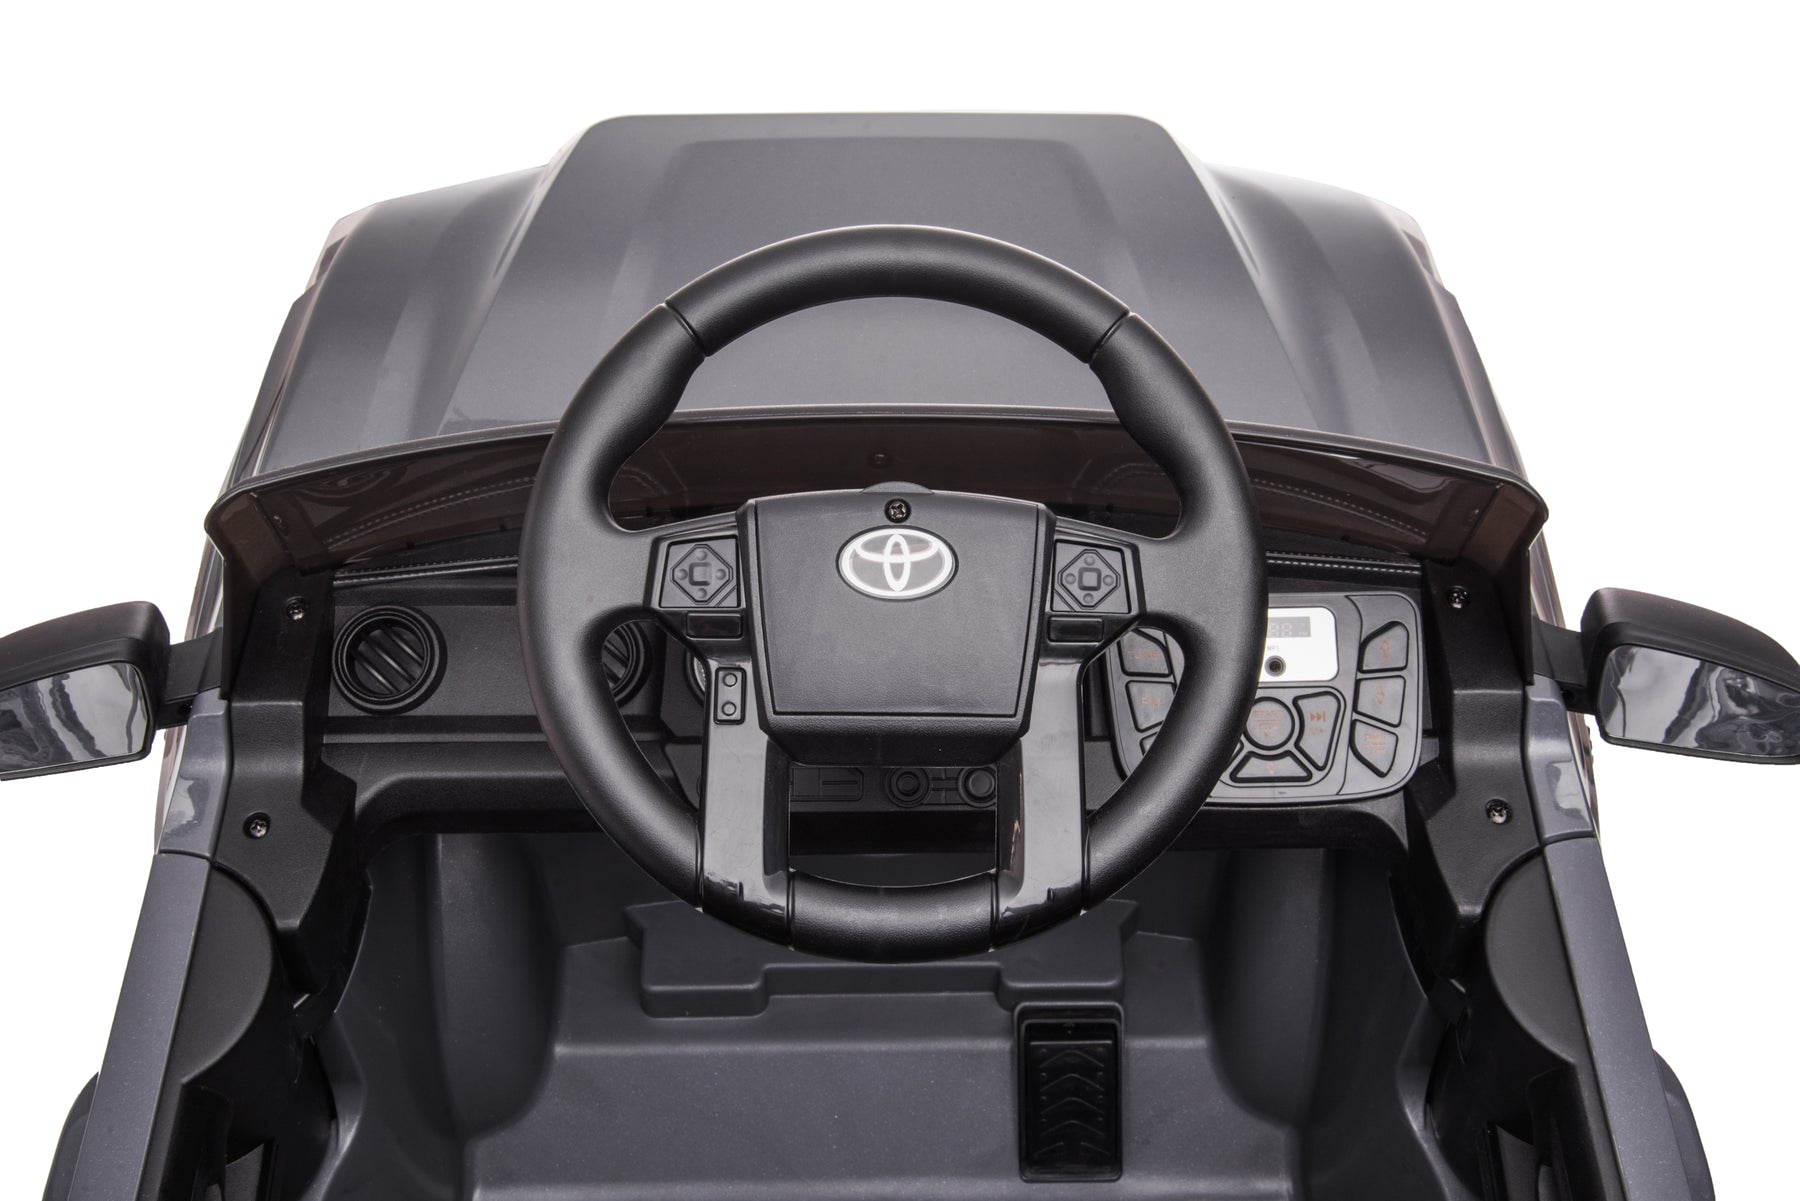 【PATENTED PRODUCT, DEALERSHIP CERTIFICATE NEEDE】Official Licensed Toyota Tacoma Ride-on Car,12V Battery Powered Electric Kids Toys - Tonkn